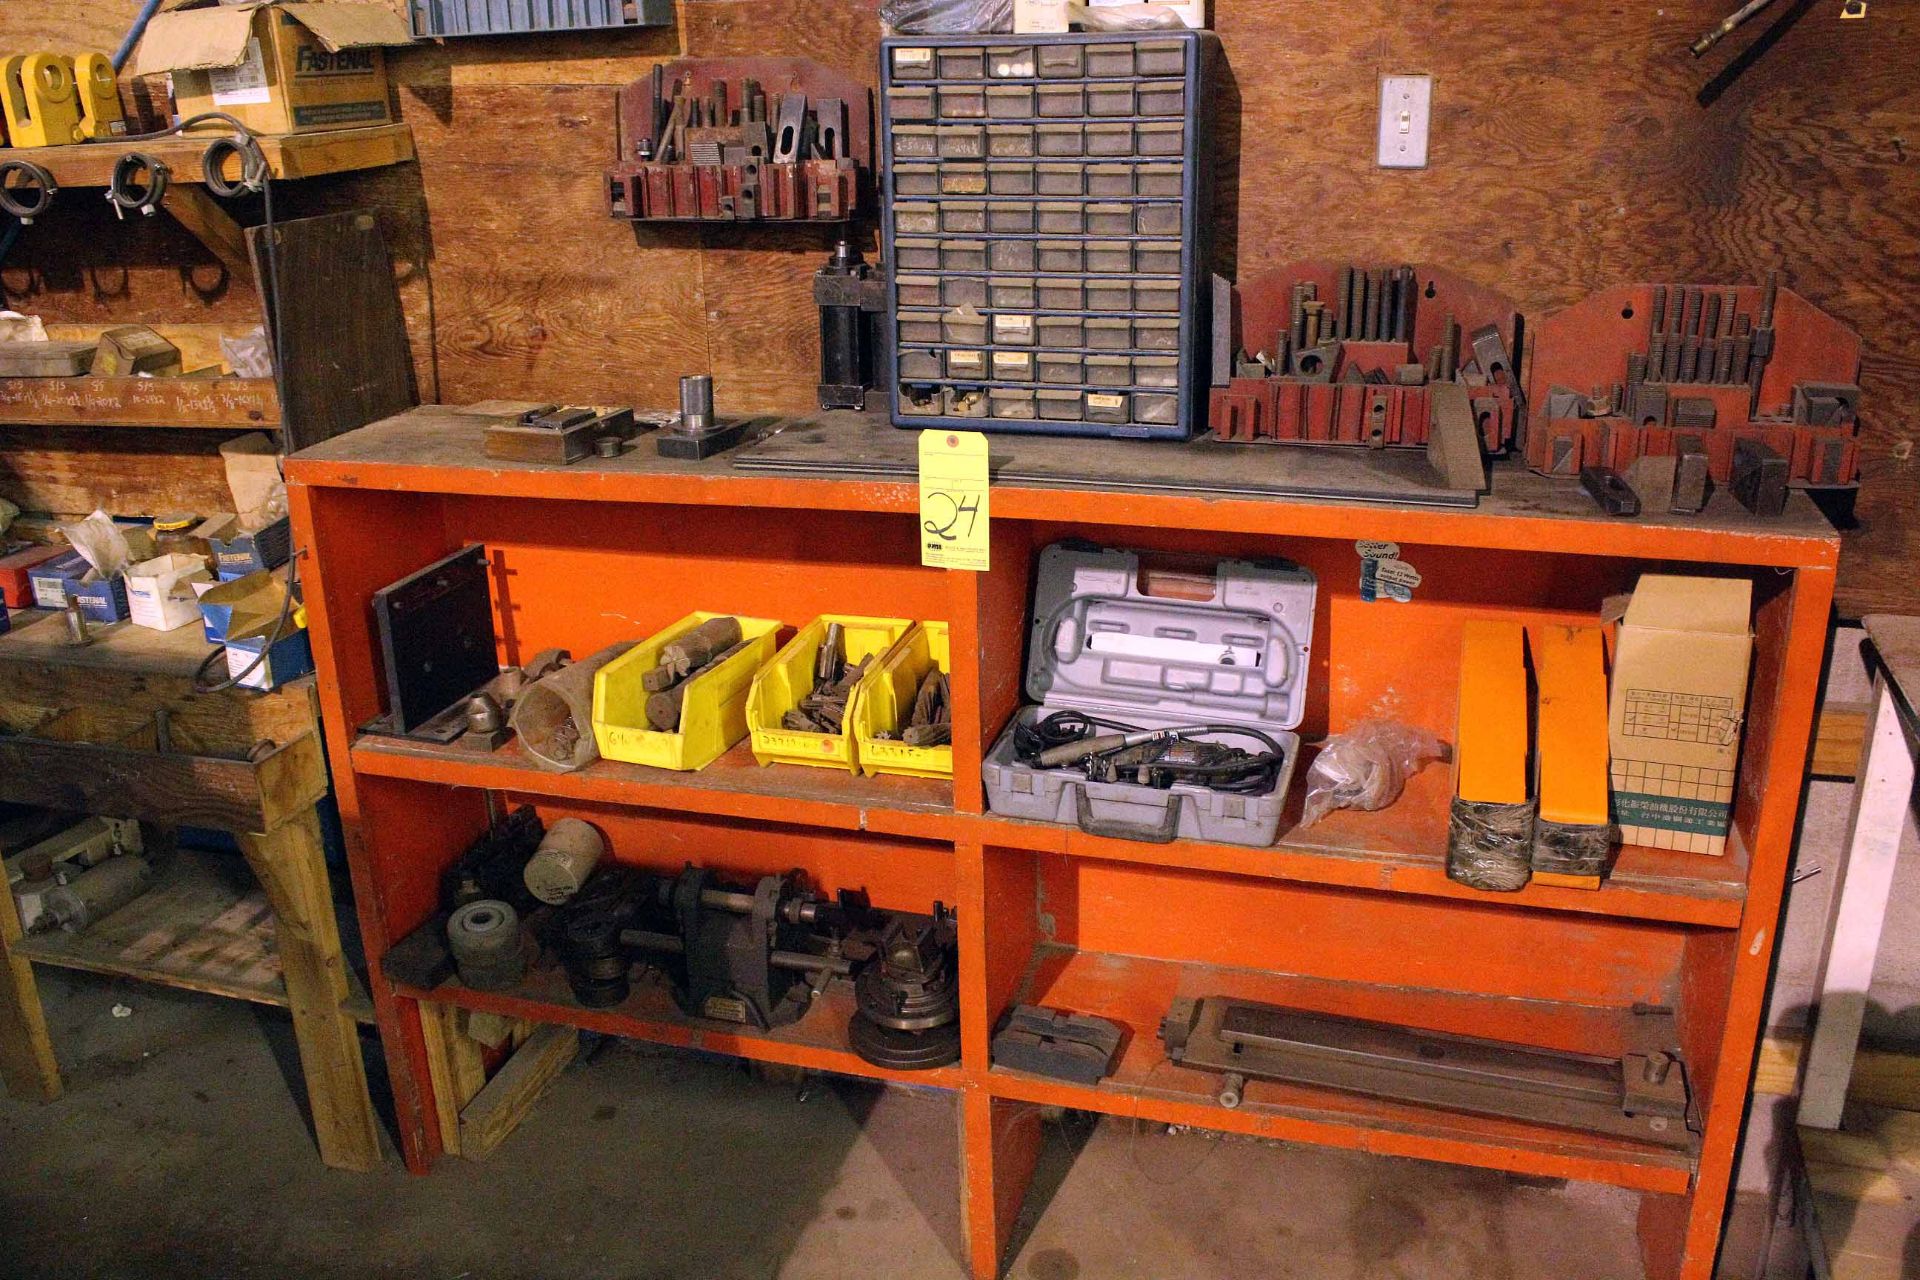 LOT CONSISTING OF: endmills, hold-down clamps, nuts, bolts, etc. - Image 2 of 3